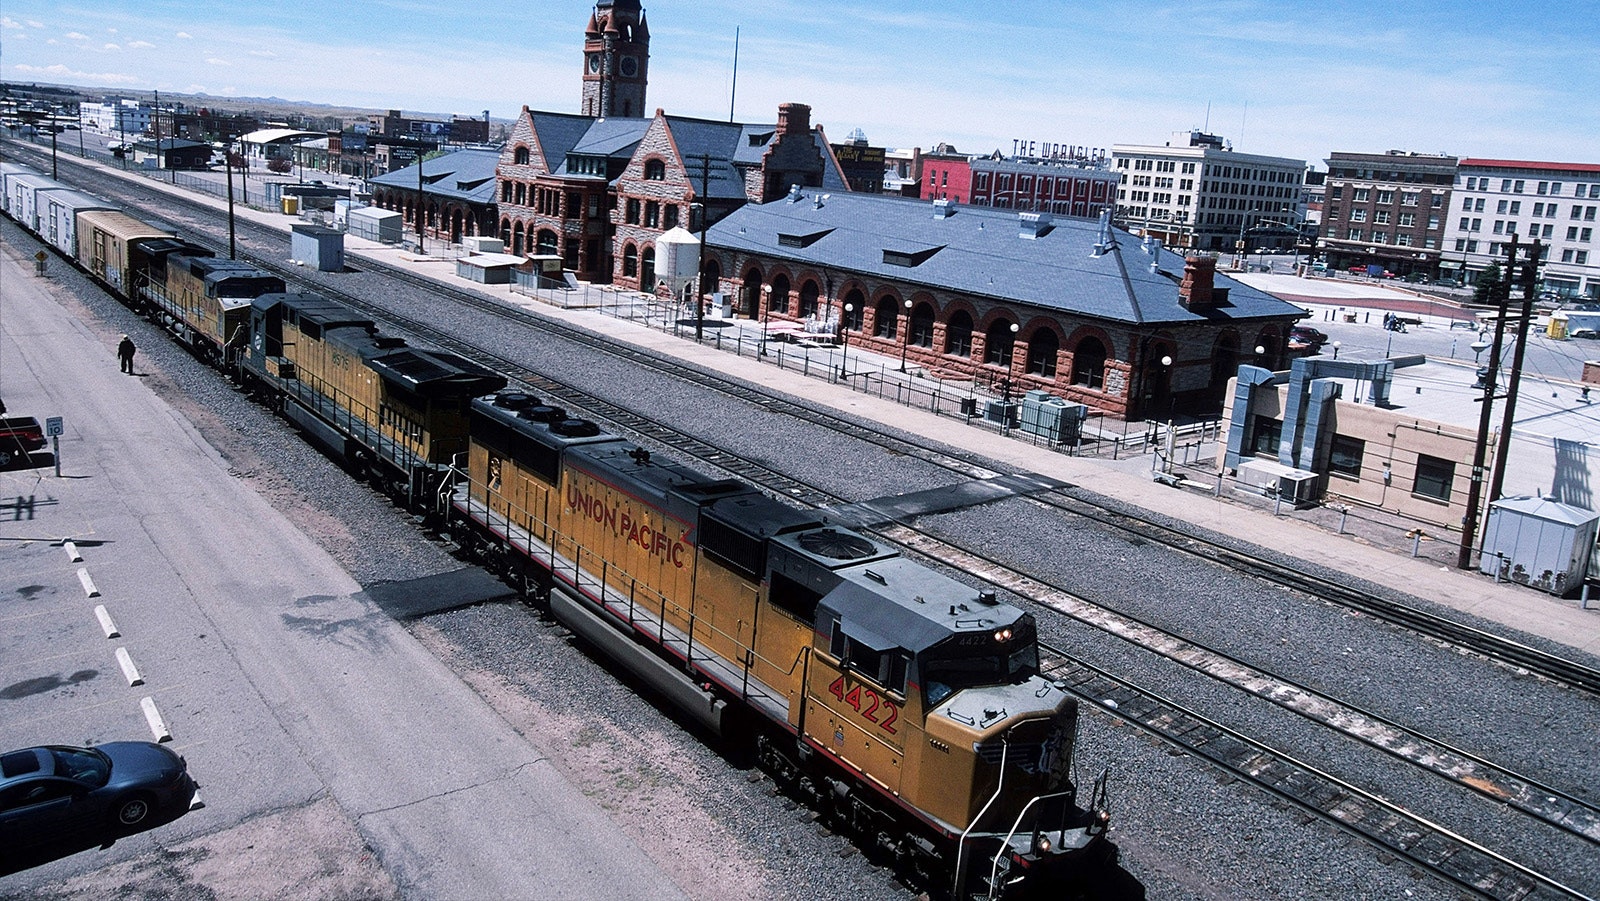 A lot of trains move through Cheyenne, and a proposal being floated would use the rail lines to also add passenger service through Wyoming and the West.